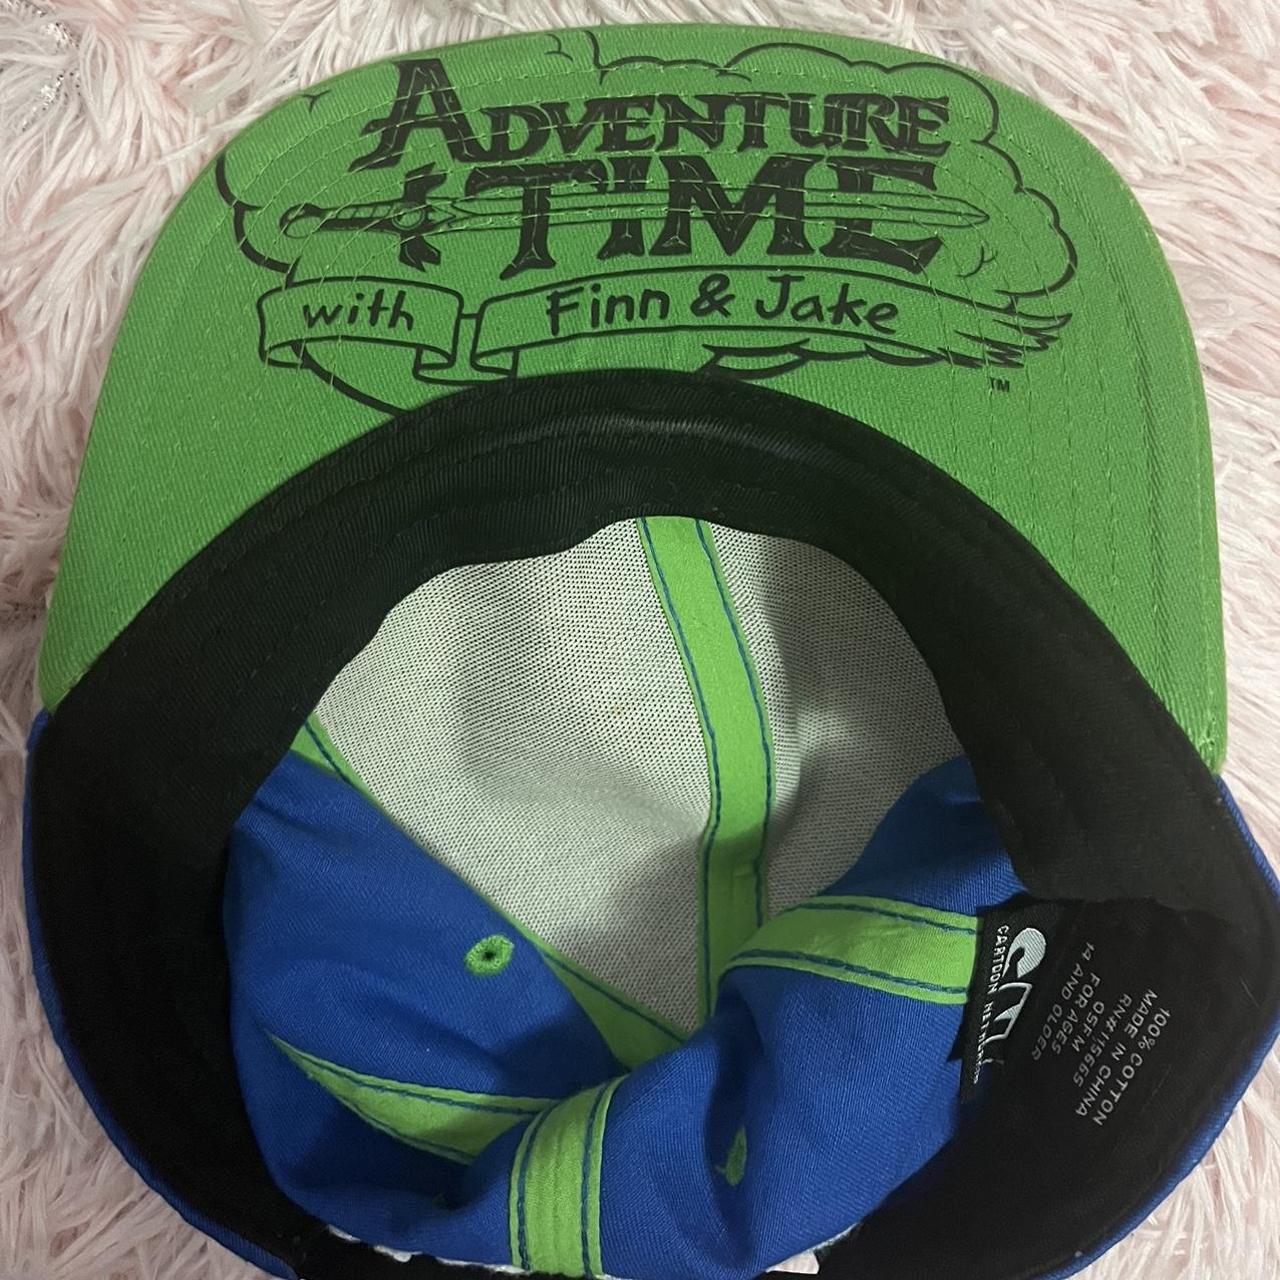 Product Image 3 - Adventure time finn hat

#2000s #hottopic